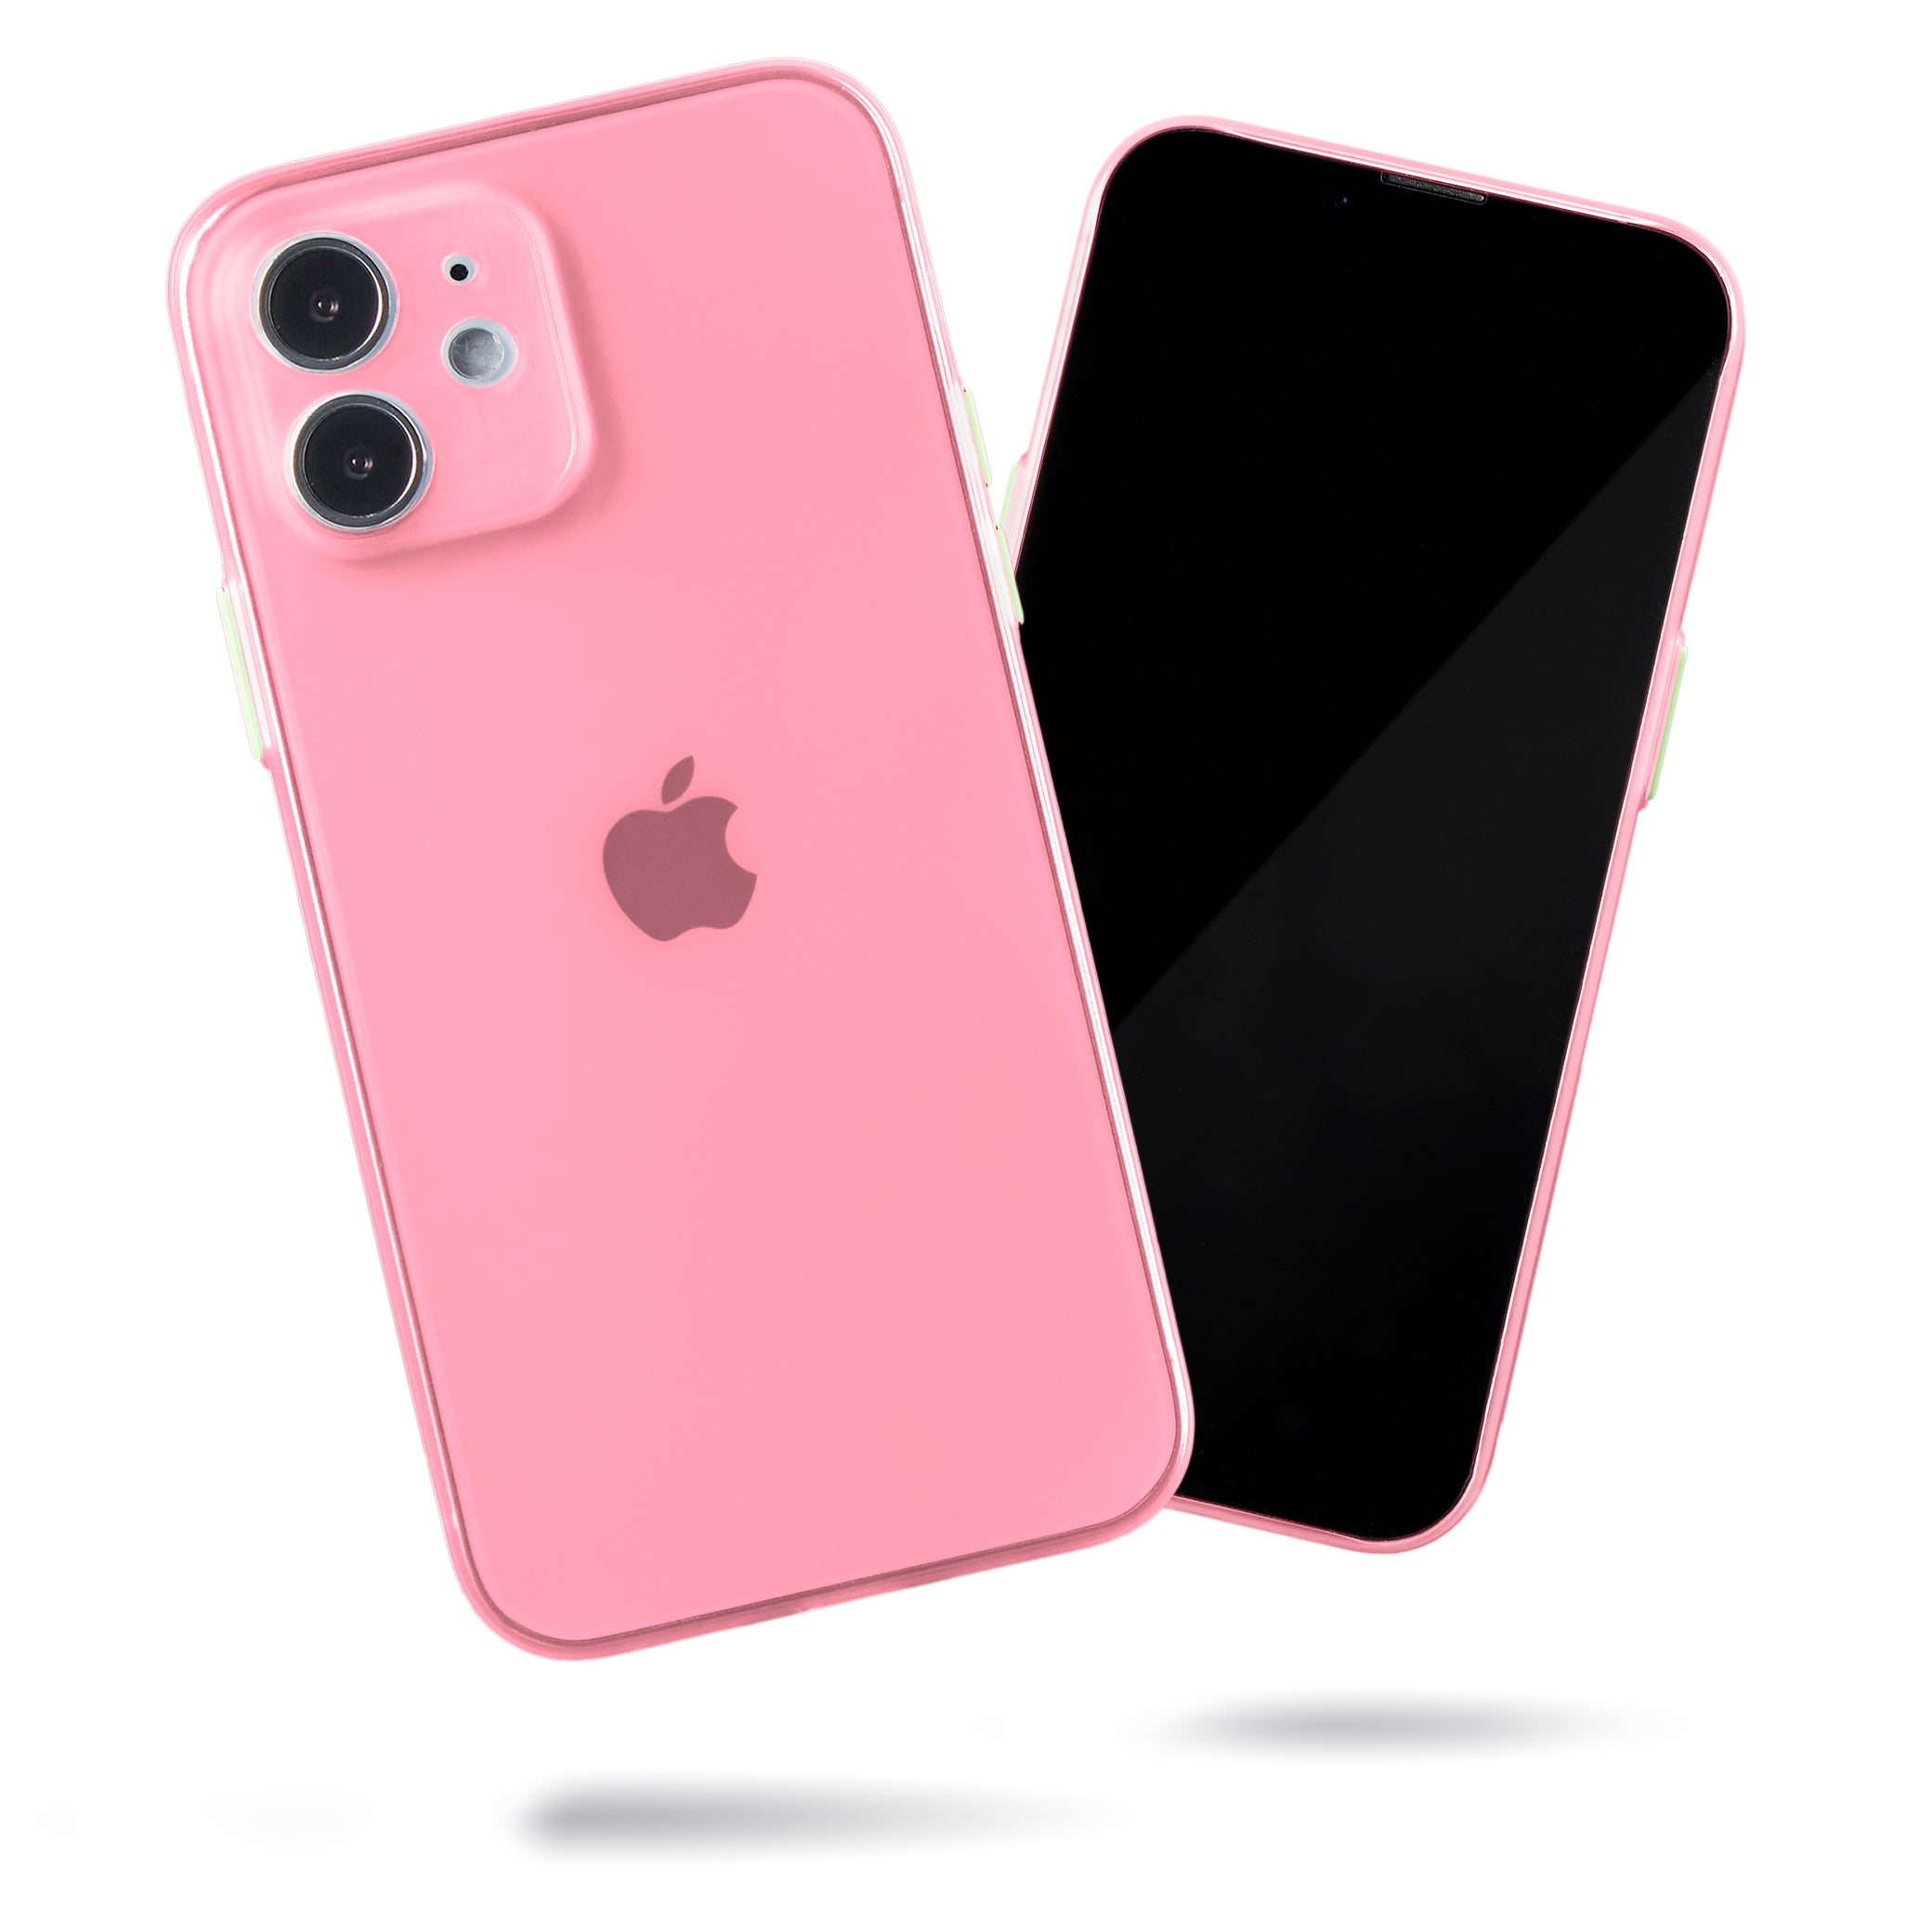 Super Slim Case 2.0 for iPhone 12 Mini - Pink Cotton Candy